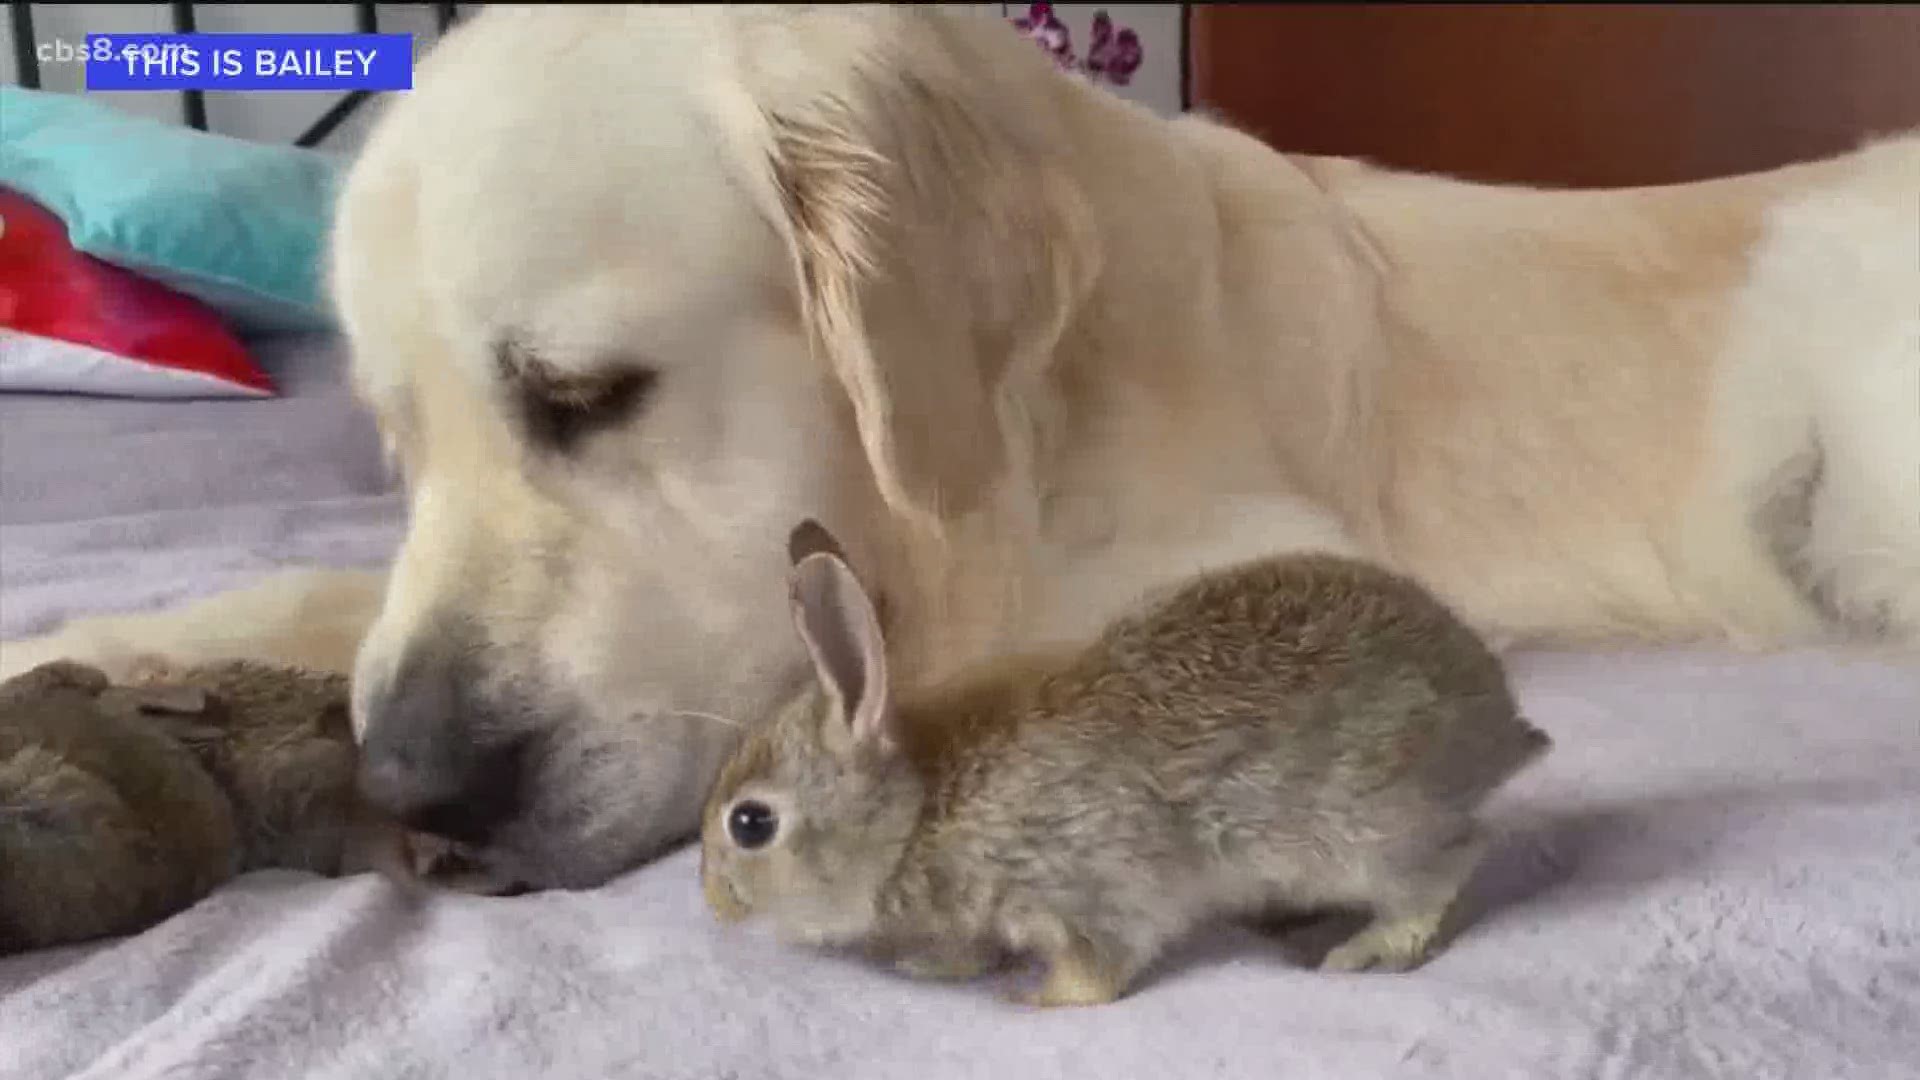 what diseases can dogs get from rabbits